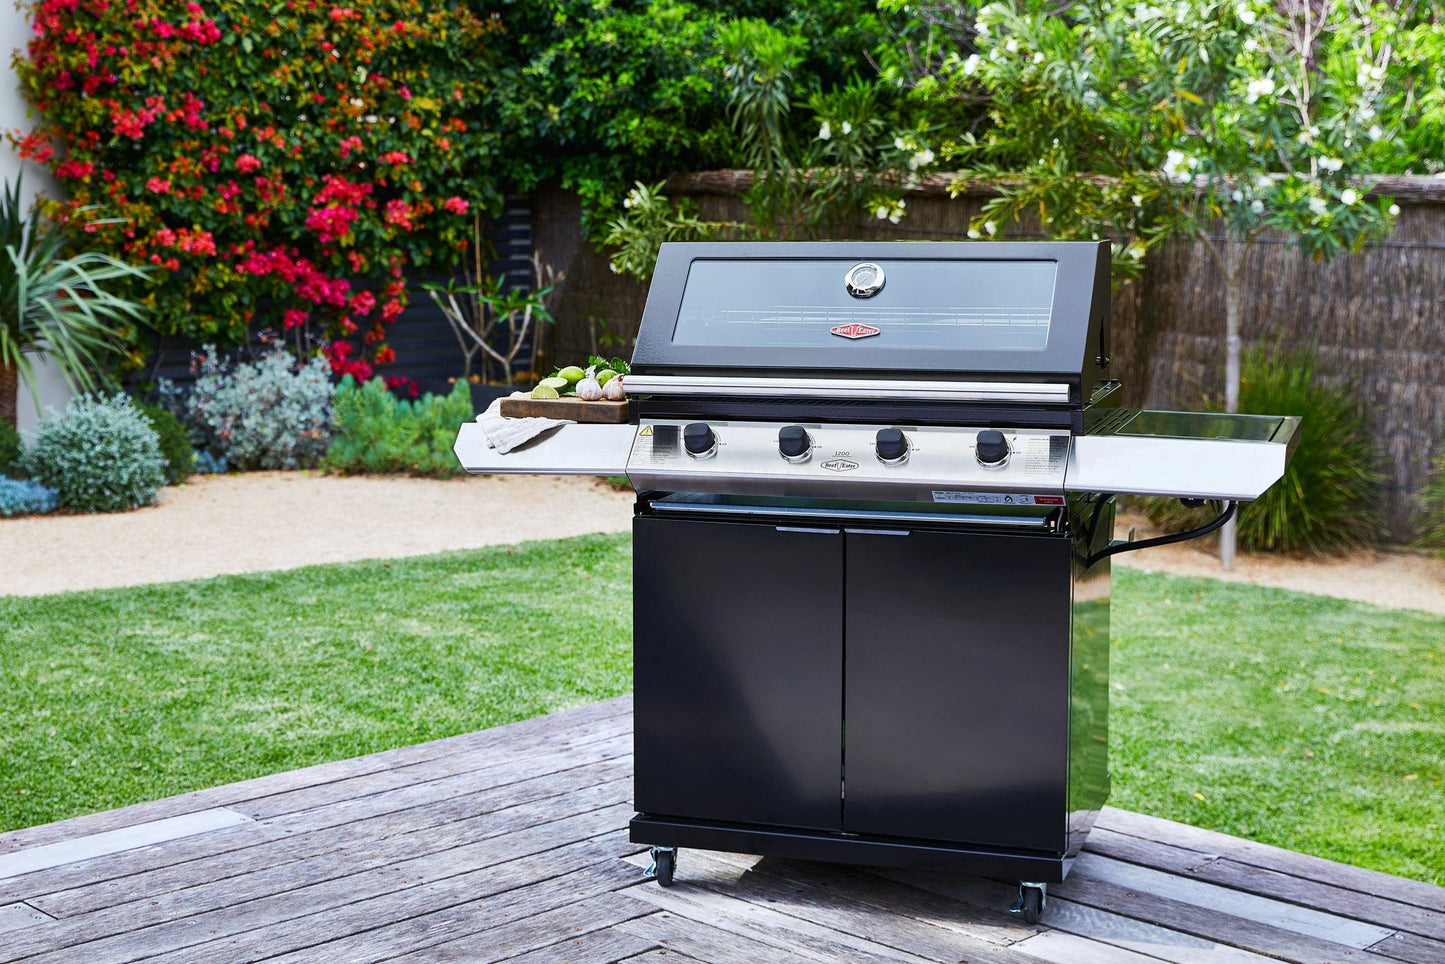 A black Brisks BeefEater 1200E Series 4 Burner BBQ & Trolley with four control knobs and a closed lid stands on a wooden deck in a garden. The grill has side handles and shelves, one holding vegetables. The background features green grass, various plants, bushes, and a tree with red flowers.